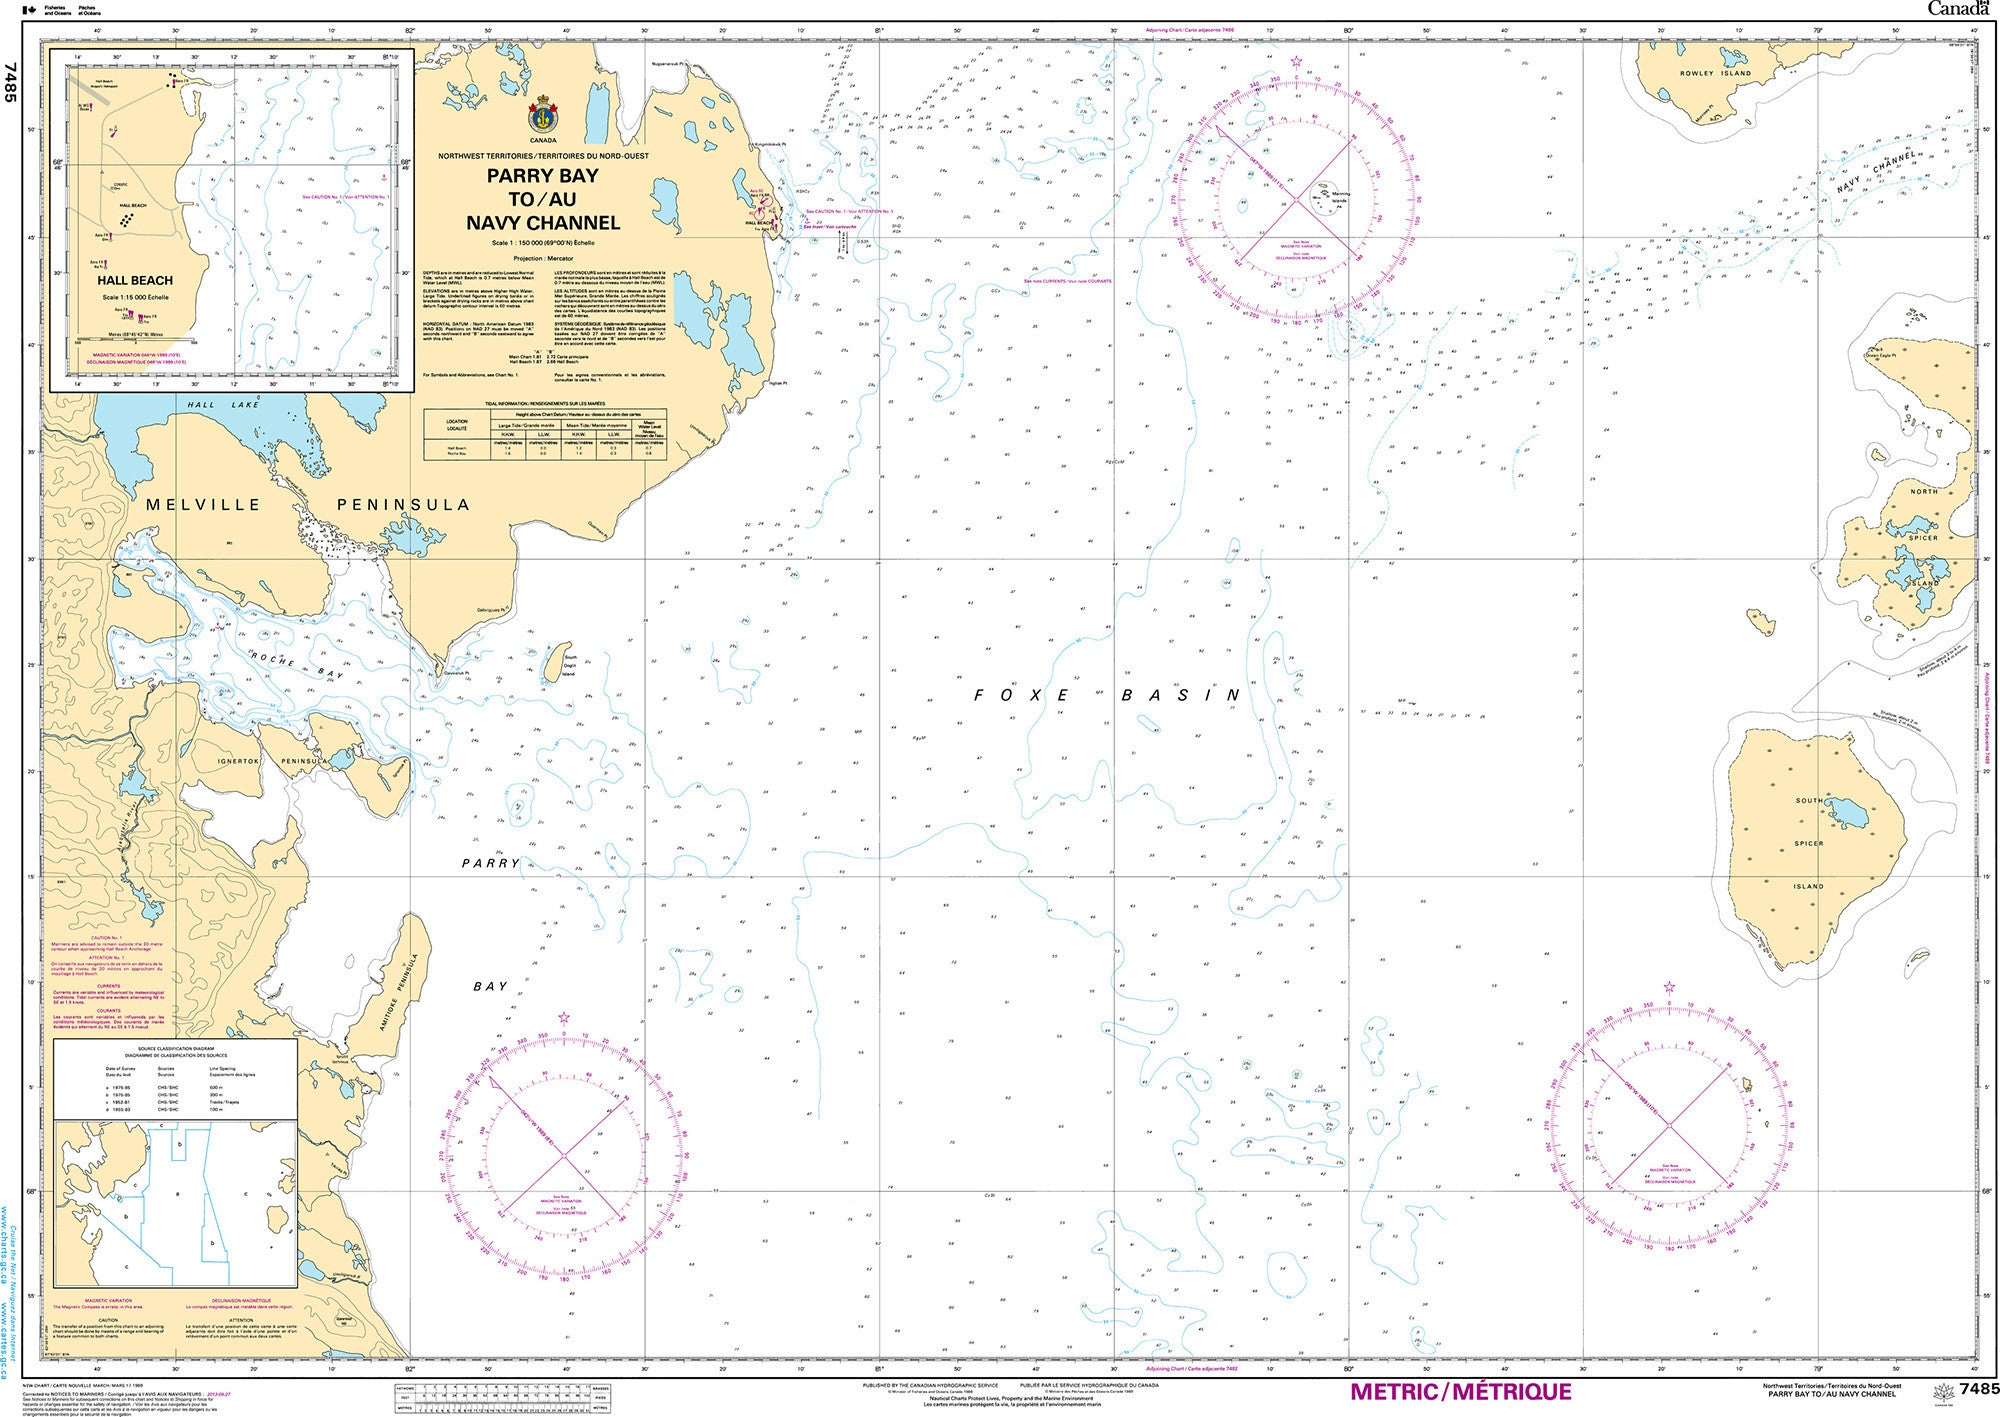 Canadian Hydrographic Service Nautical Chart CHS7485: Parry Bay to/au Navy Channel